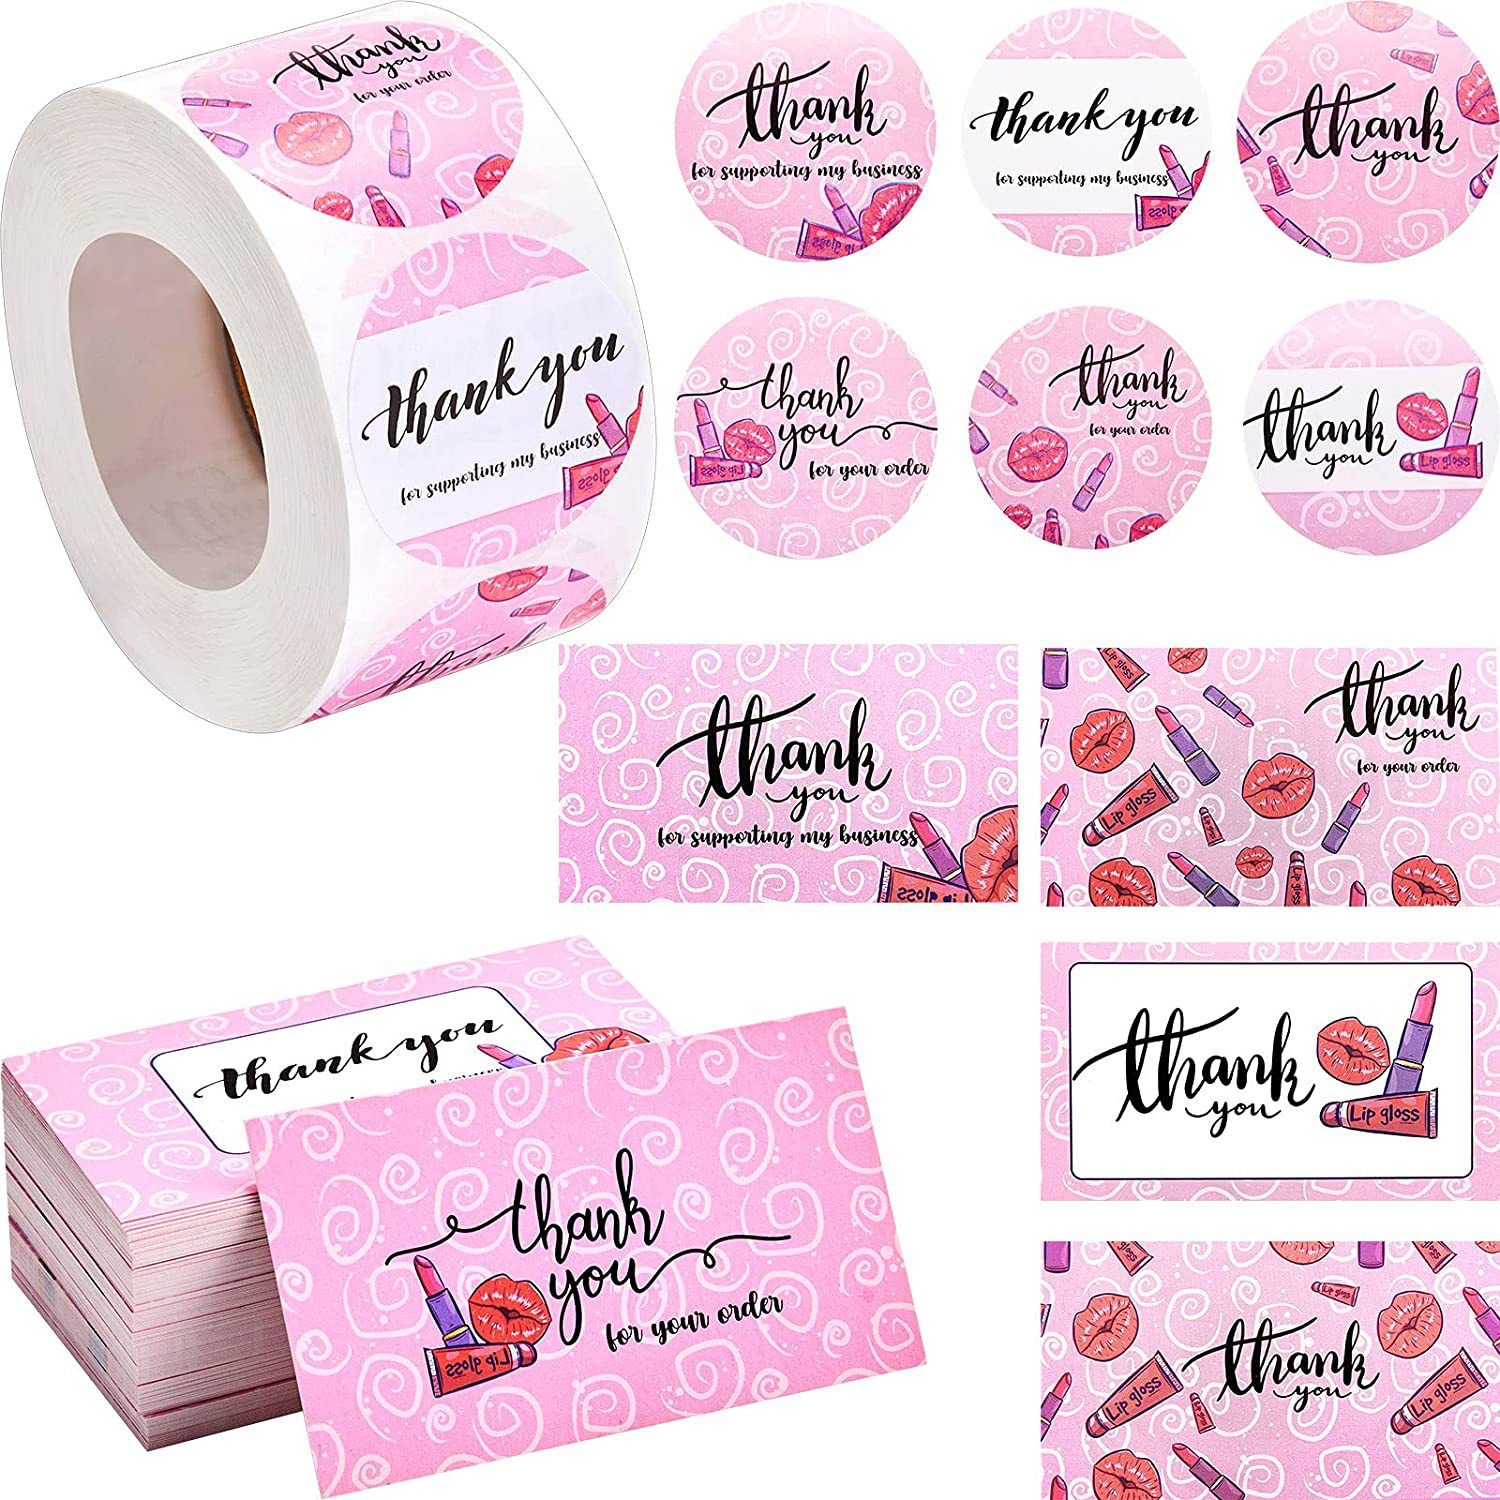 MEMORY SPORTS 50/500PCS Party Supplies Candy Bags Paper For Supporting My Business Label Stickers Thanks Greeting Cards Thank You Stickers Thank You Card